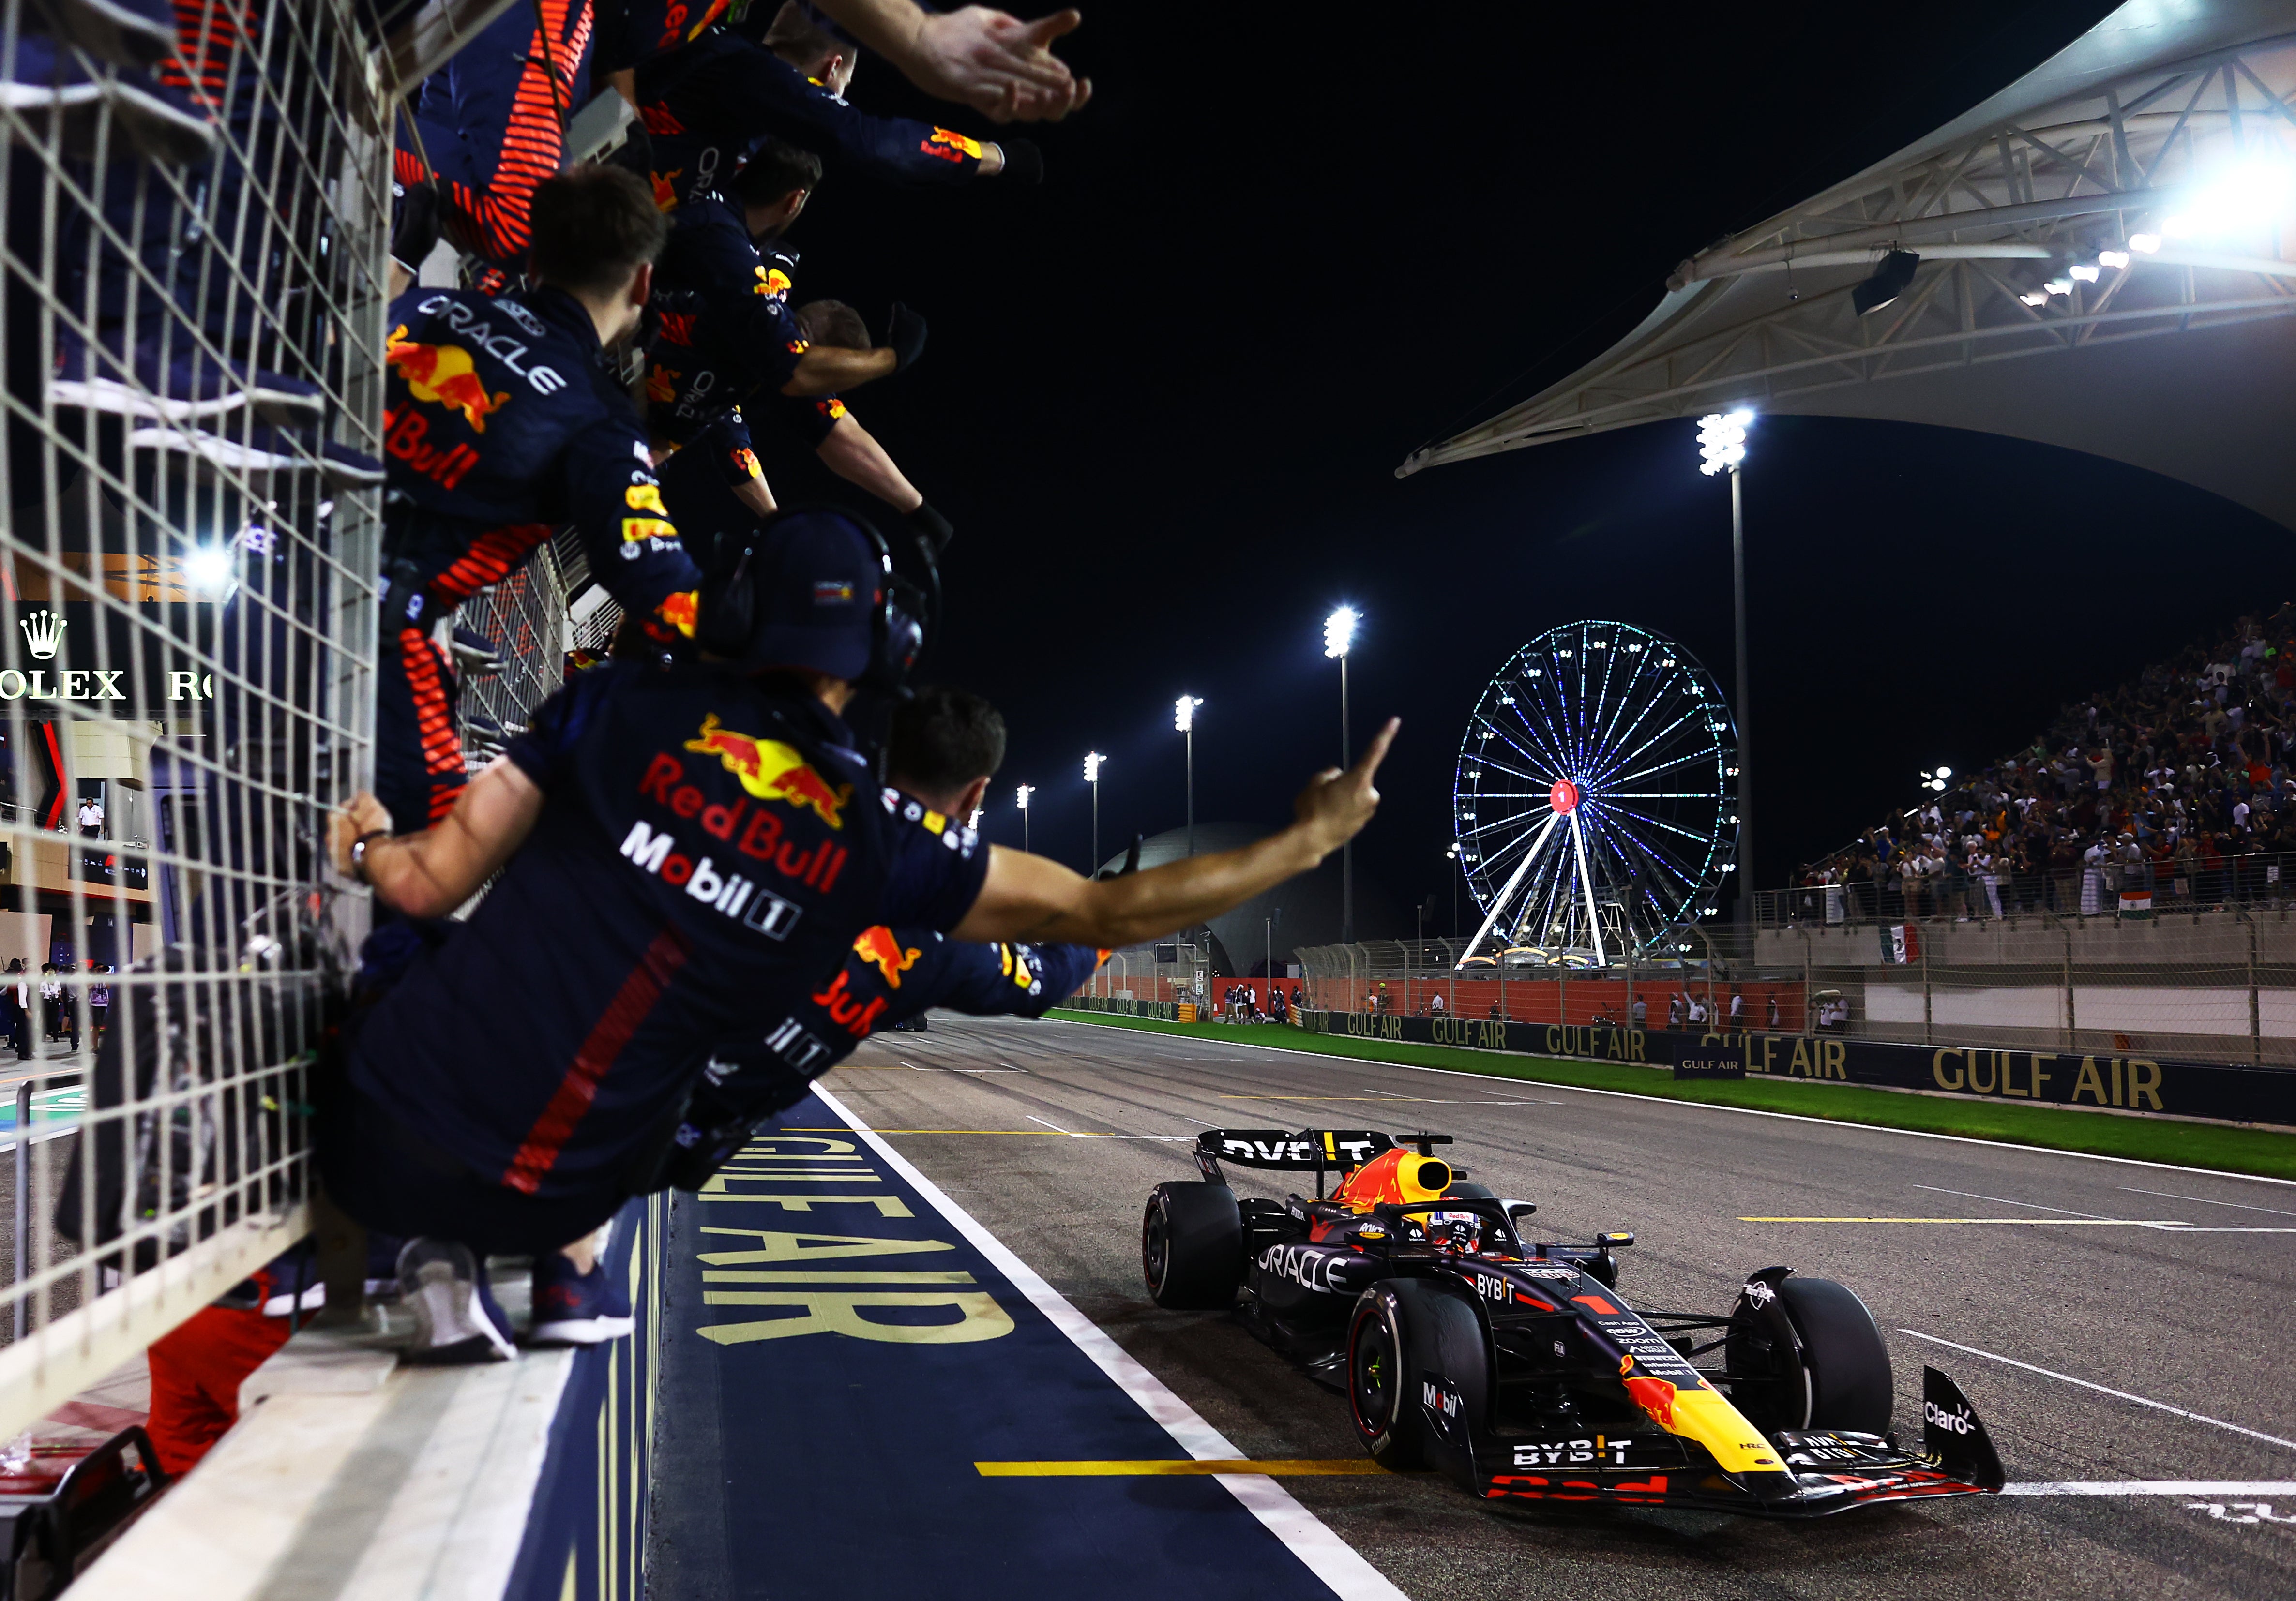 Max Verstappen cruised to victory in Bahrain